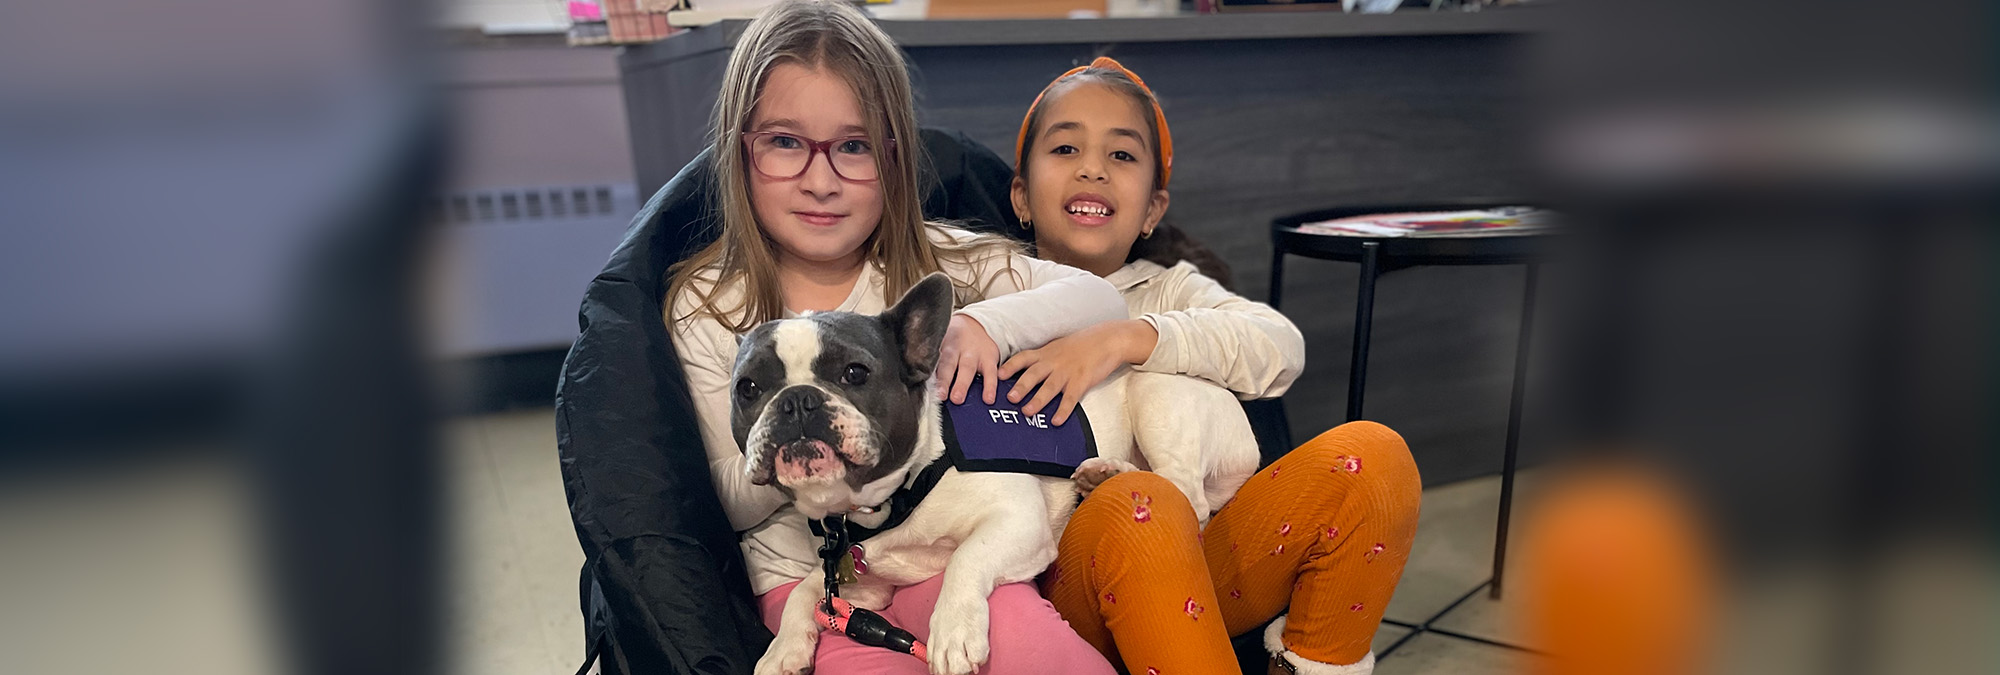  Two students sitting with a therapy dog on their laps